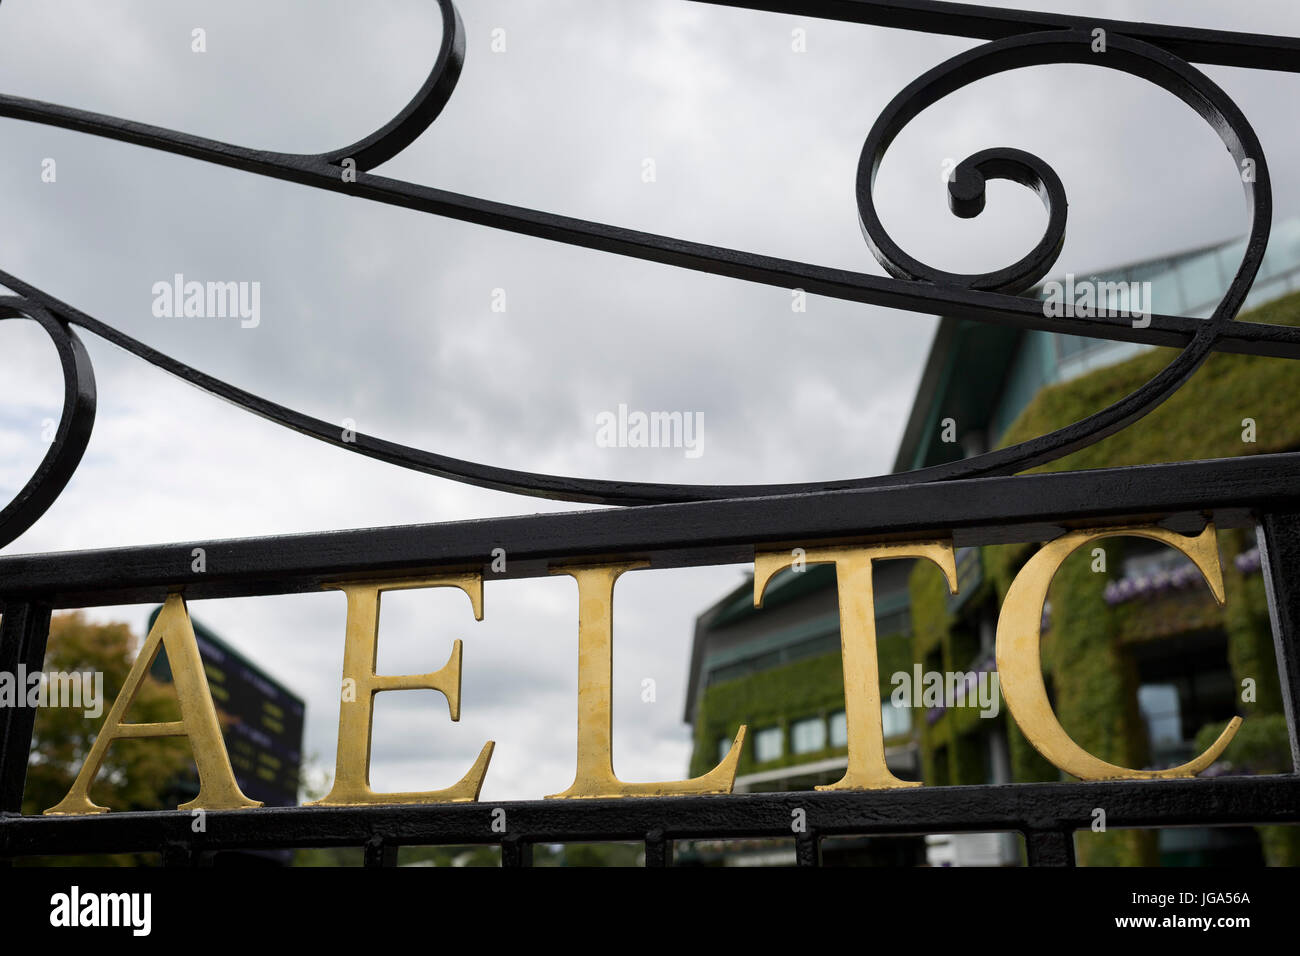 The main gates of the AELTC (All England Lawn Tennis Club) during the Wimbledon tennis championships, on 3rd July 2017, in Wimbledon, London, England. Stock Photo